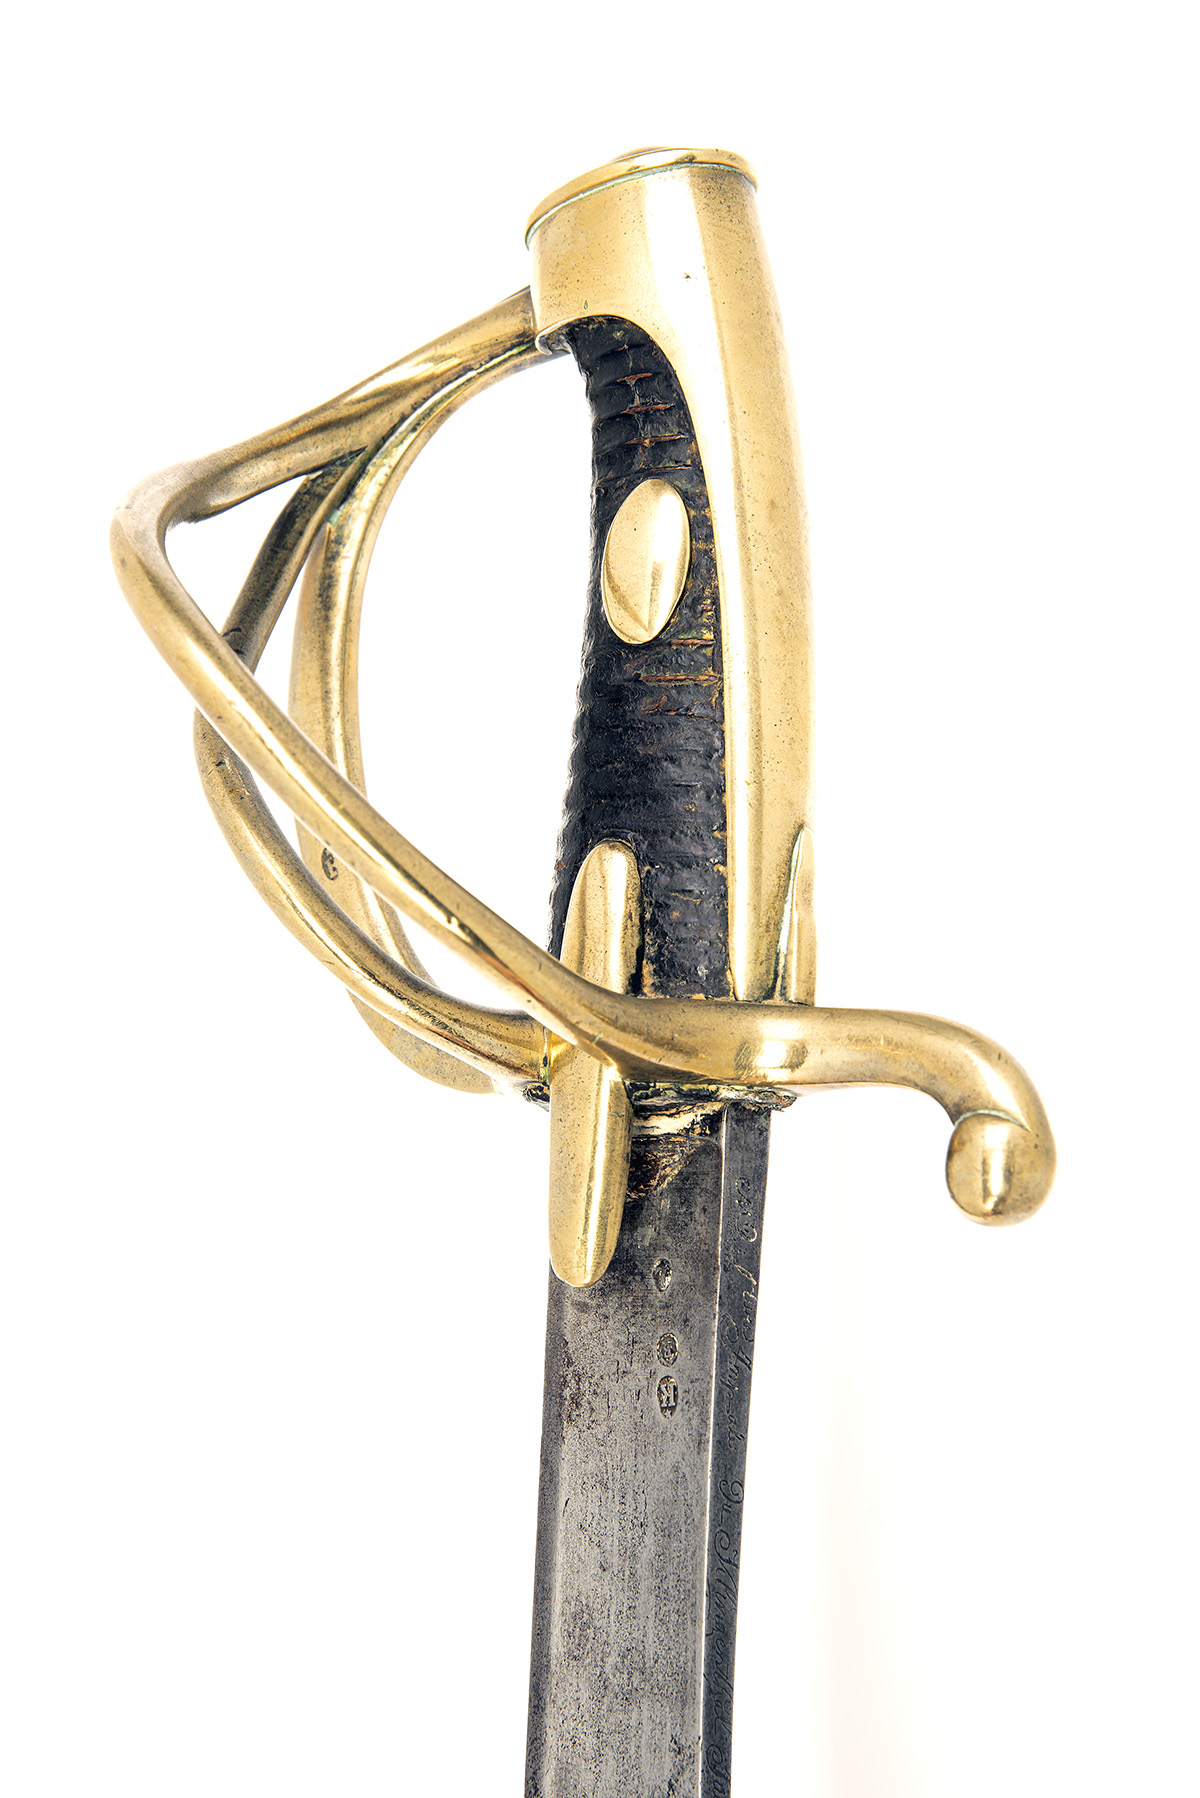 A NAPOLEONIC-ERA FRENCH HUSSAR TROOPER'S SWORD SIGNED KLINGENTHAL, no visible serial number, dated - Image 2 of 4